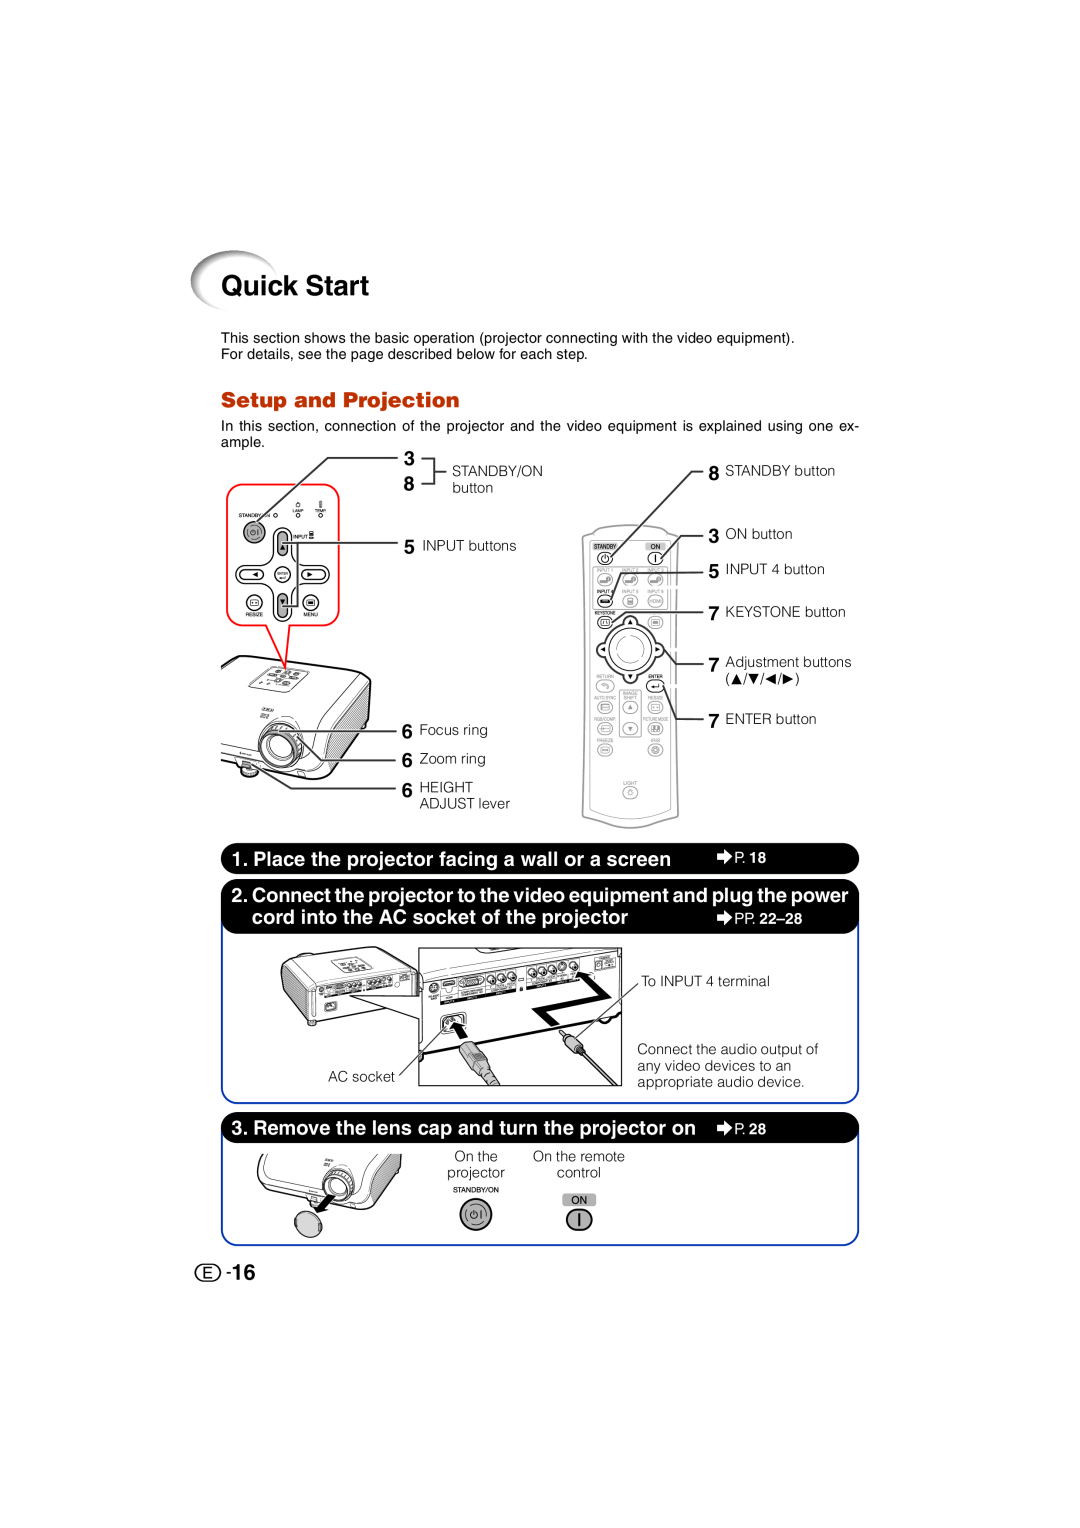 Sharp XV-Z3000U operation manual Quick Start, Setup and Projection, Place the projector facing a wall or a screen 